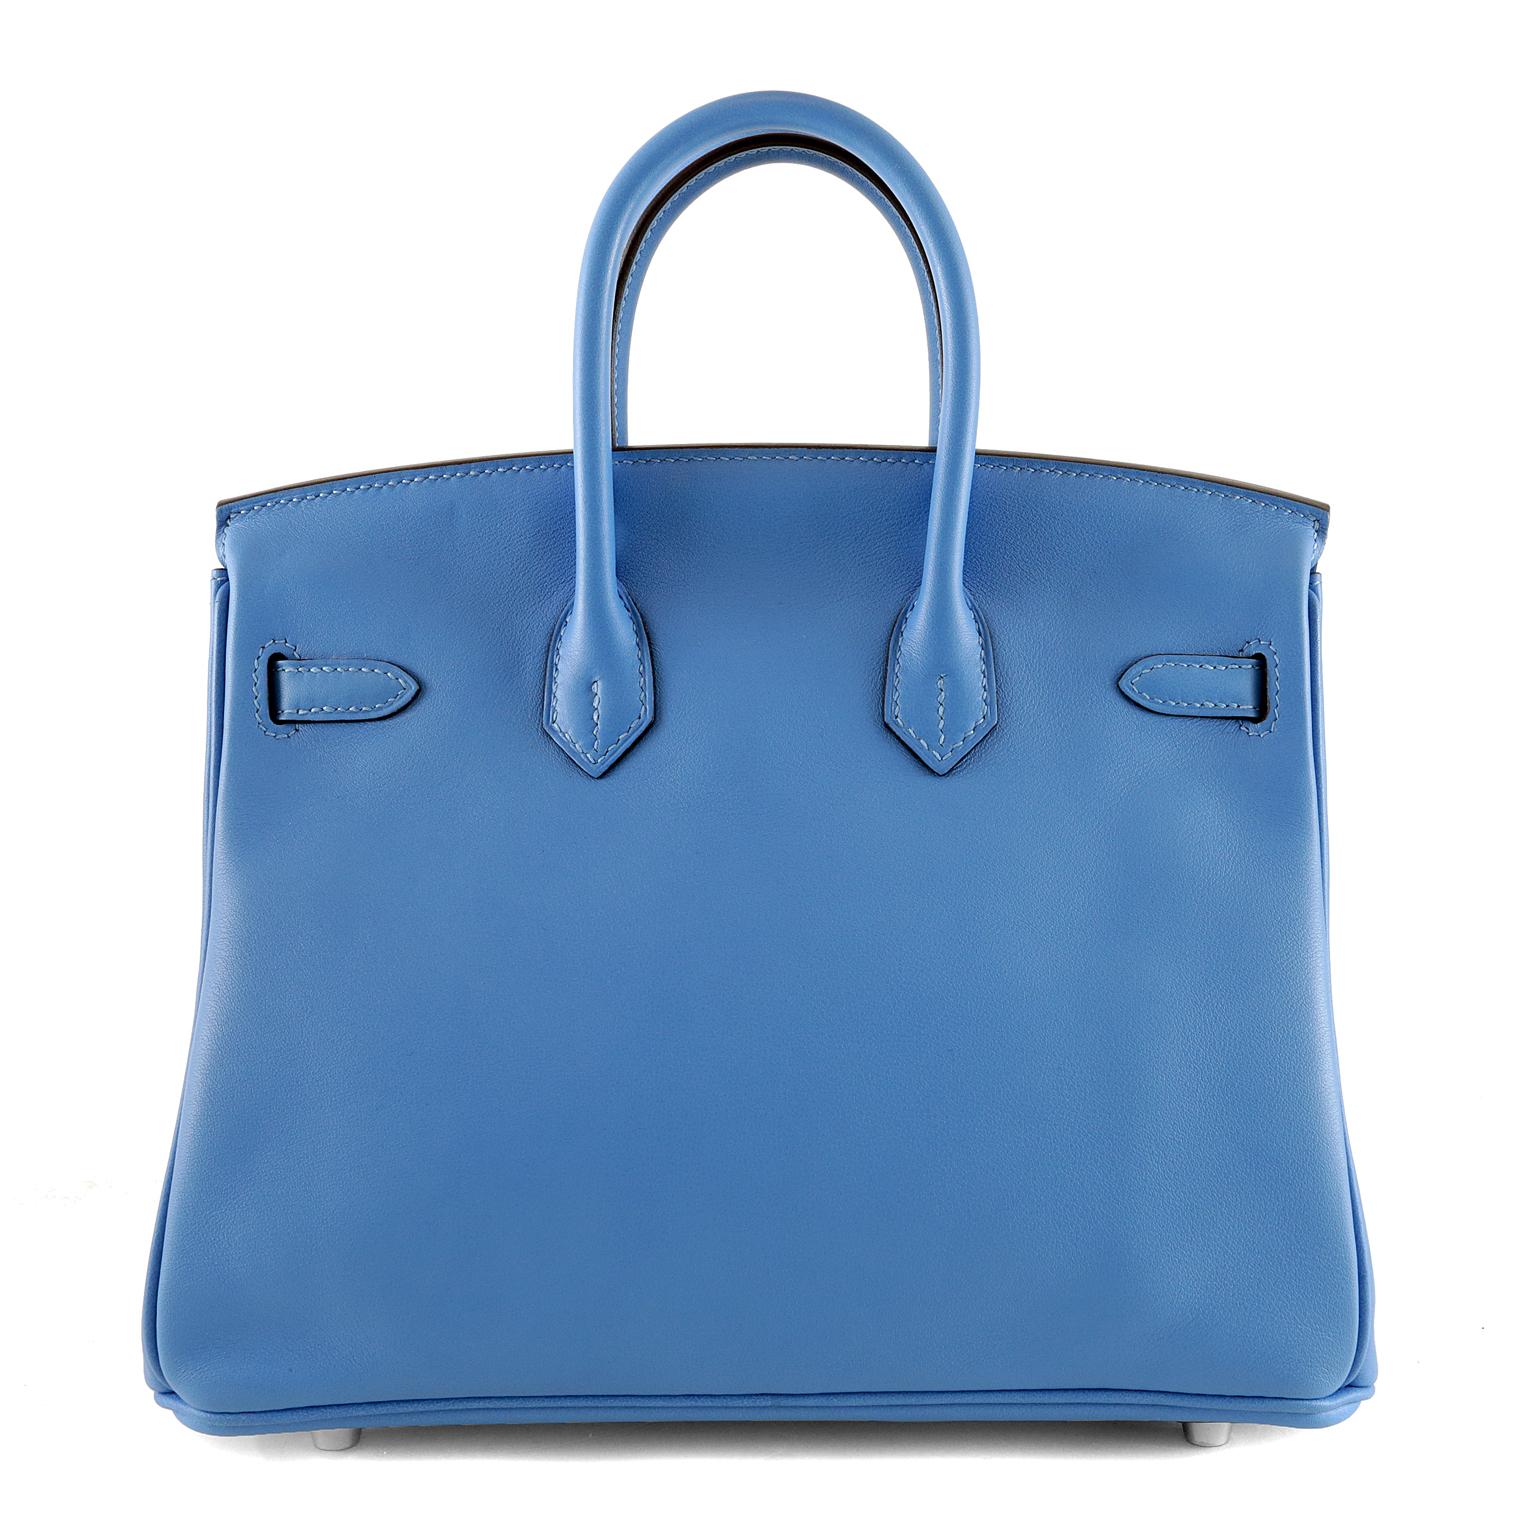 Hermès Blue Paradise Swift Leather 25 cm Birkin Bag- pristine unworn condition
Waitlists exceeding a year are commonplace for the intensely coveted classic leather Birkin bag.  Each piece is hand crafted by skilled artisans and represents the